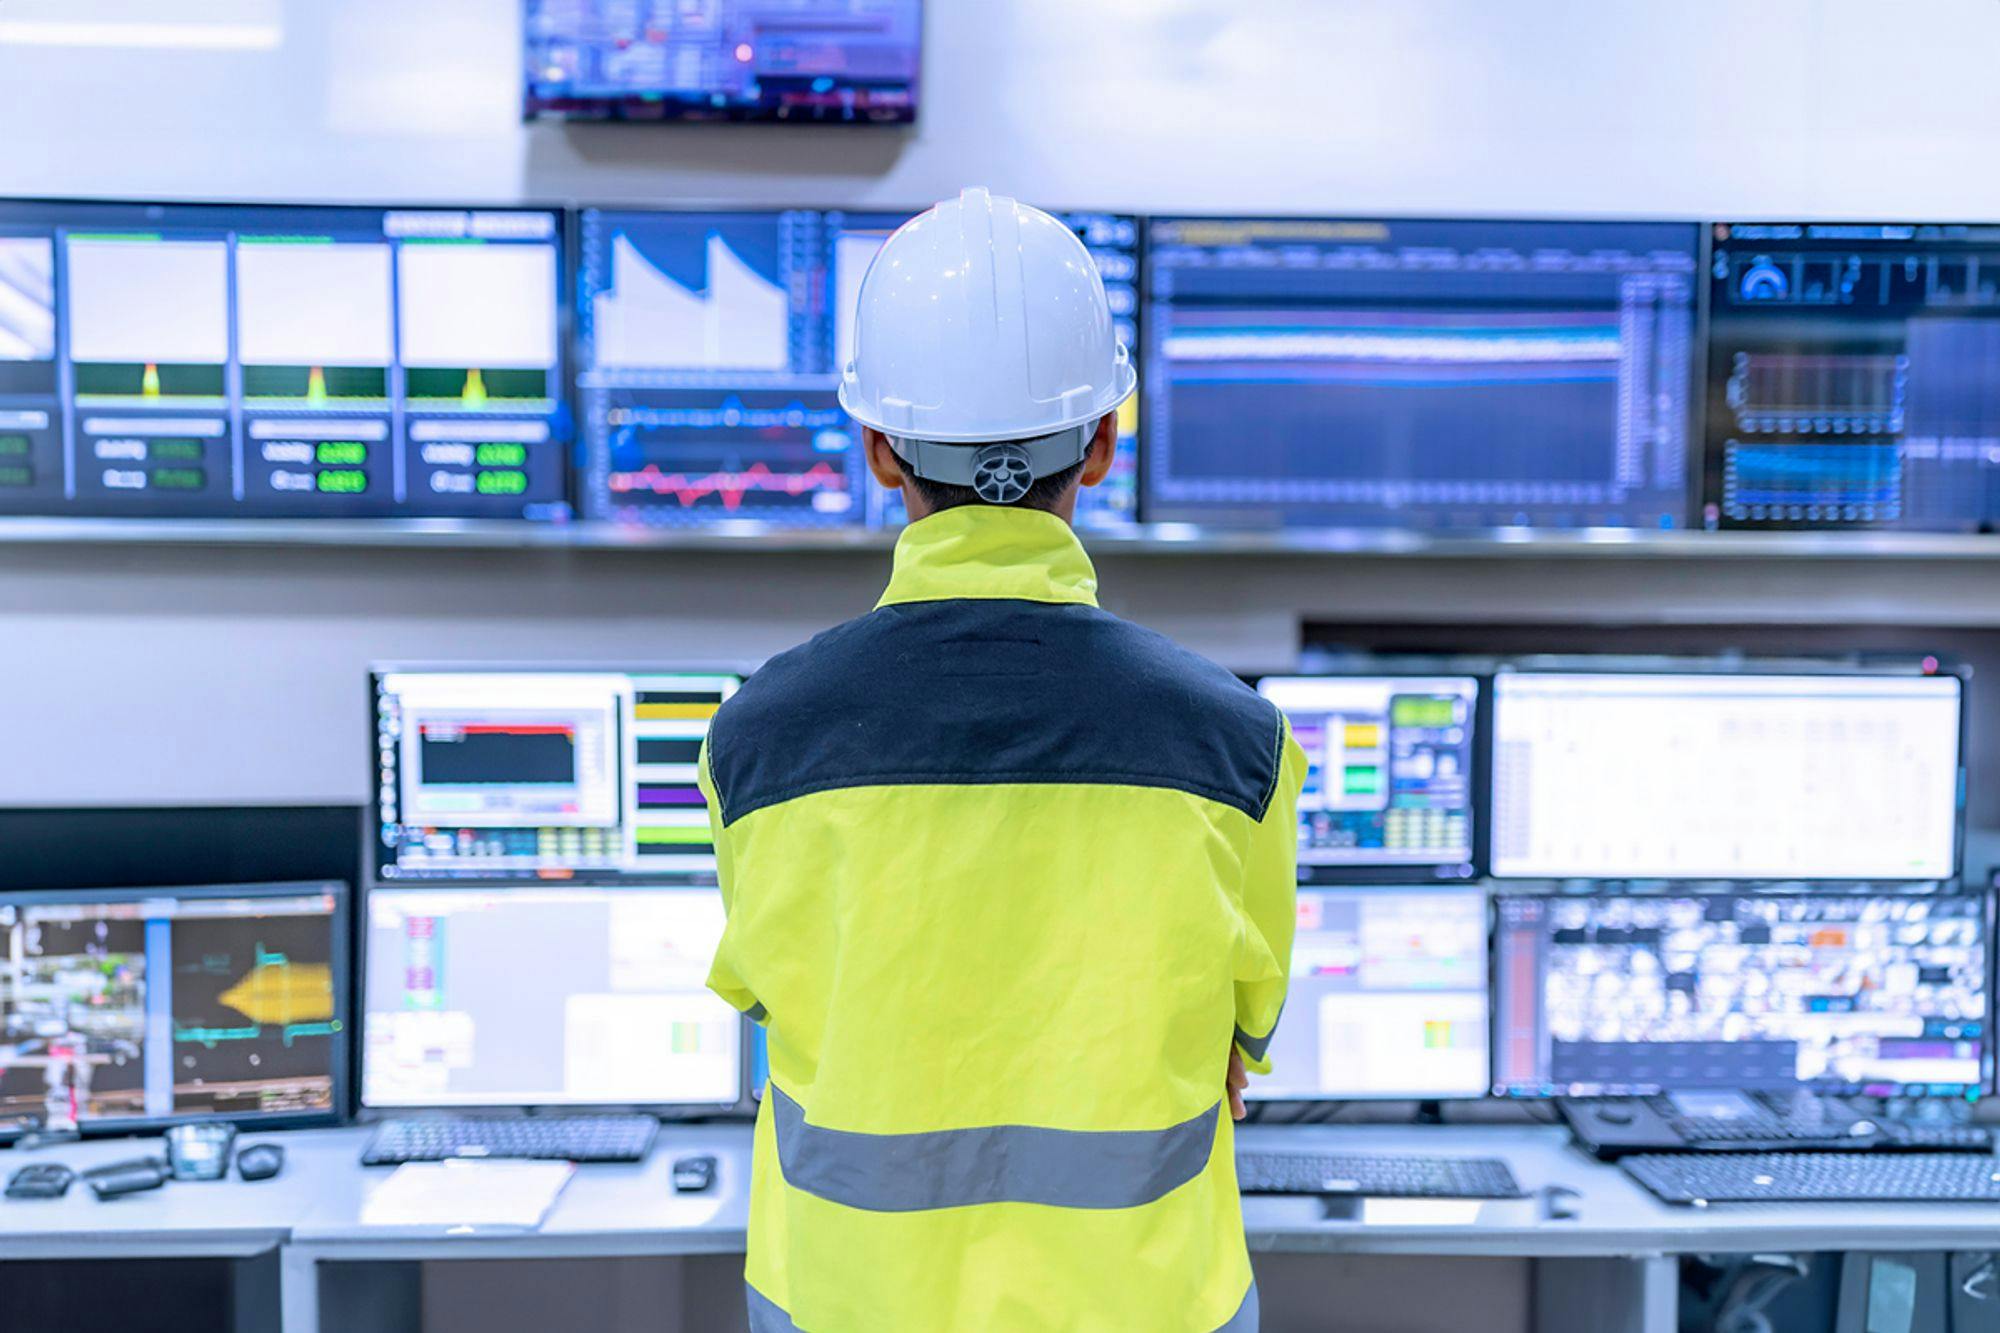 Engineer managing control systems with TAG in a high-tech control room with multiple monitors.